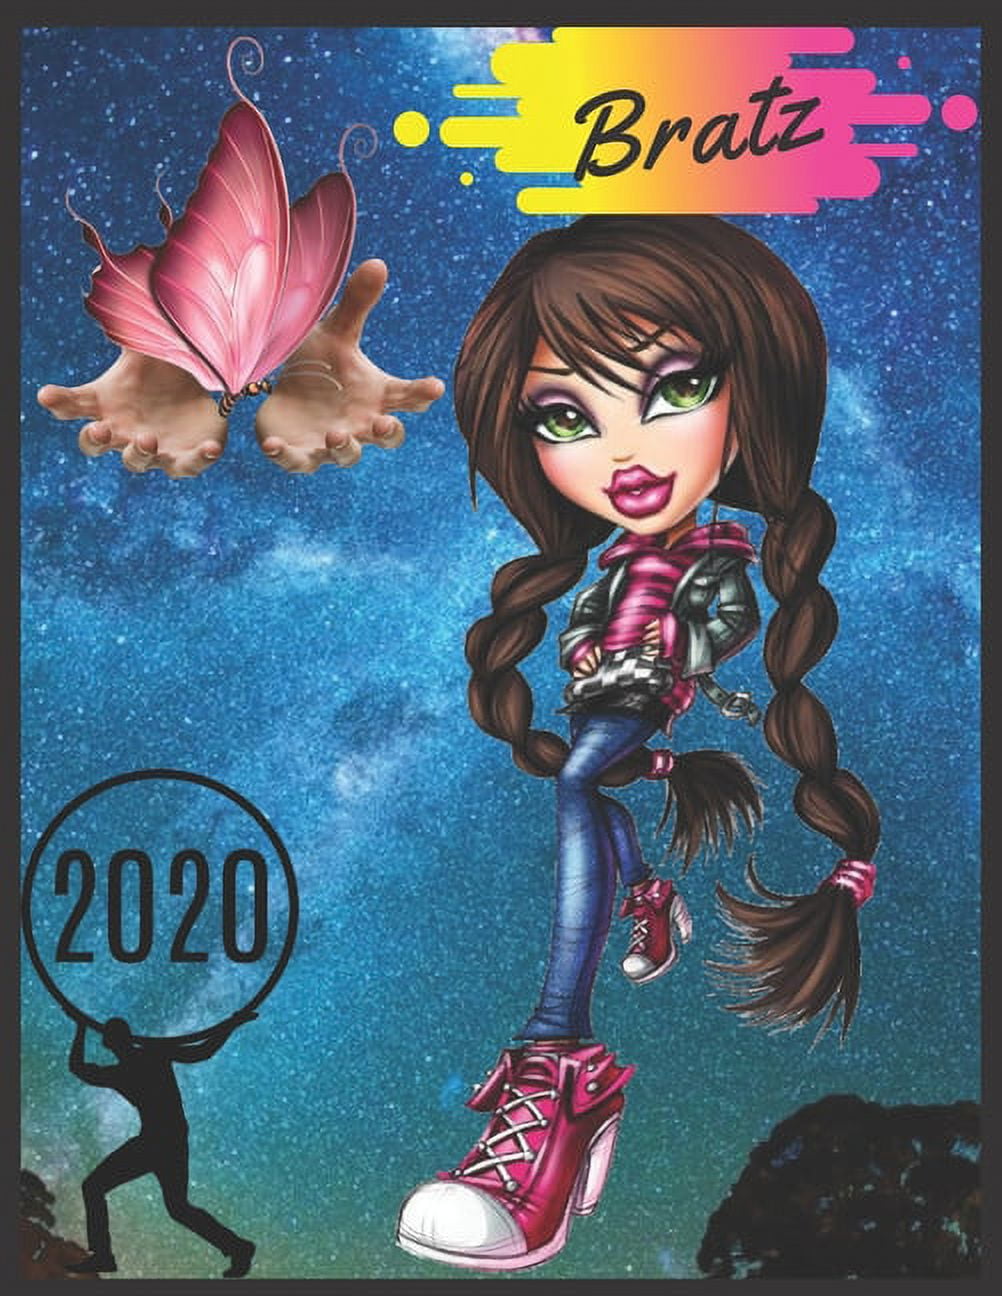 Coloring Book for Adults Relaxation and for Kids Ages 4-12 Ser.: Bratz  Coloring Book : Coloring Book for Kids and Adults, Activity Book, Great  Starter Book for Children by Juliana Orneo (2018